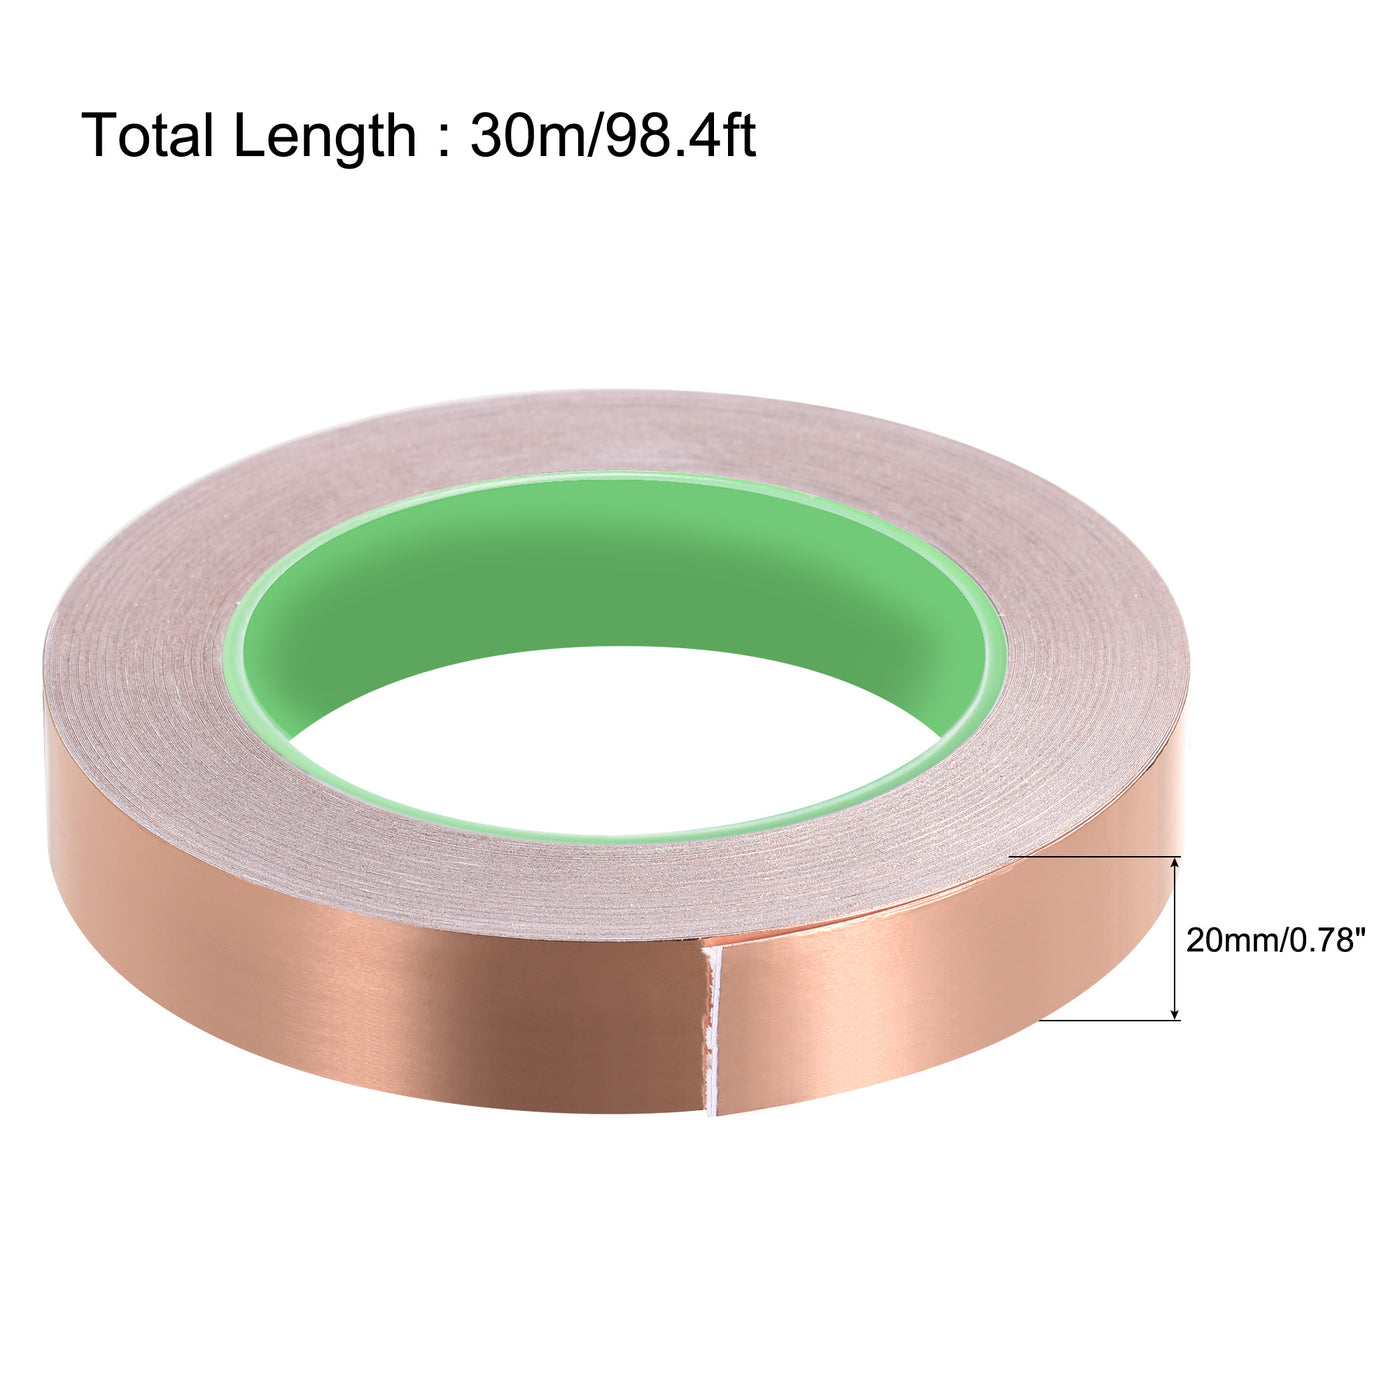 uxcell Uxcell Double-Sided Conductive Tape Copper Foil Tape 20mm x 30m/98.4ft 1pcs